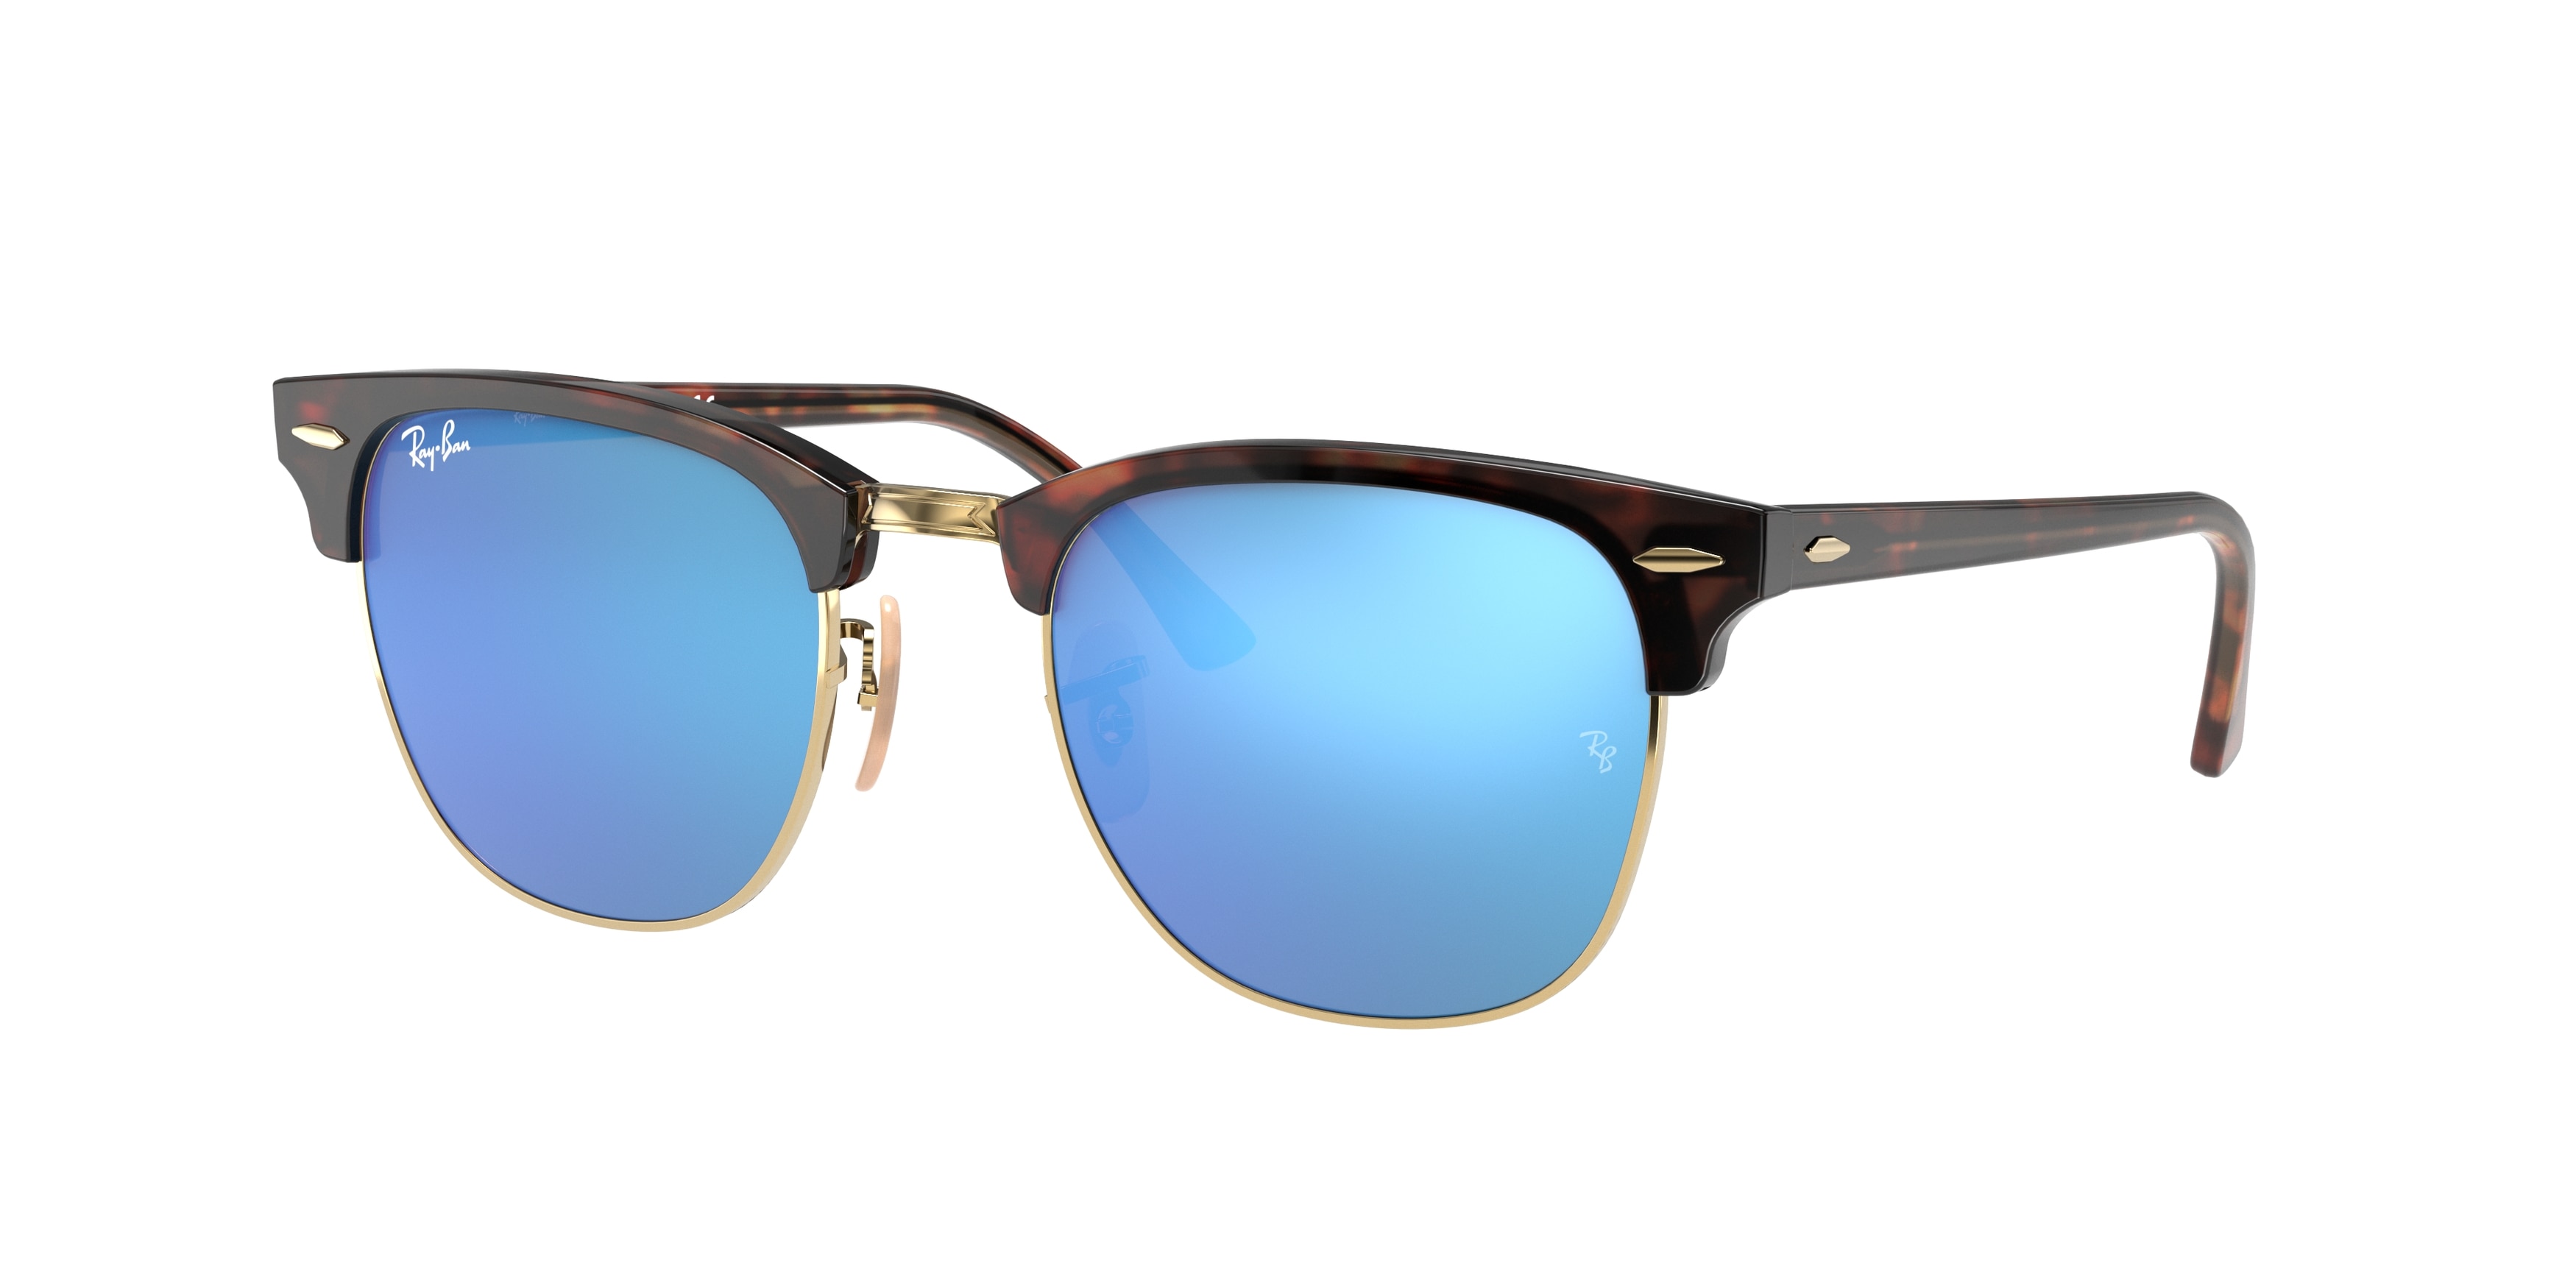 Buy Ray-ban Clubmaster RB3016 114517